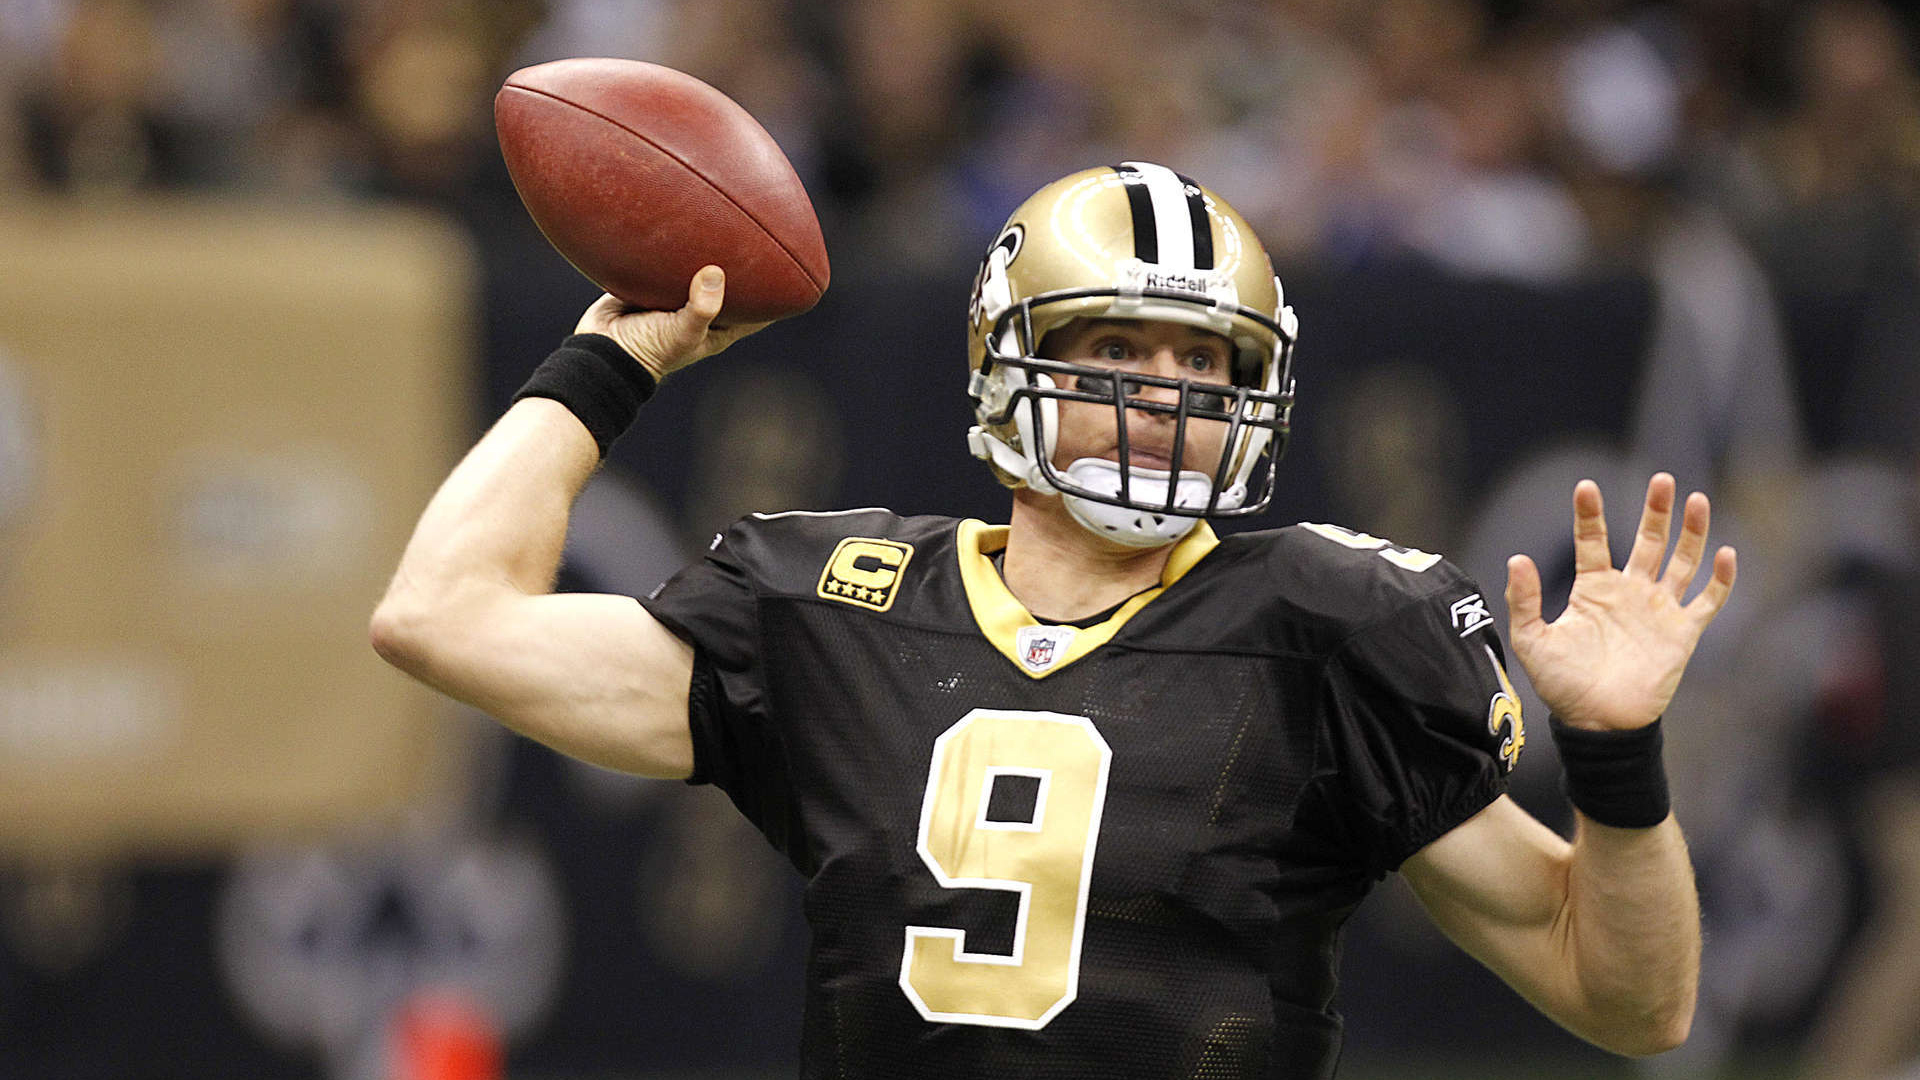 Drew Brees With Ball In Shallow Wallpaper Of People 2K Drew Brees